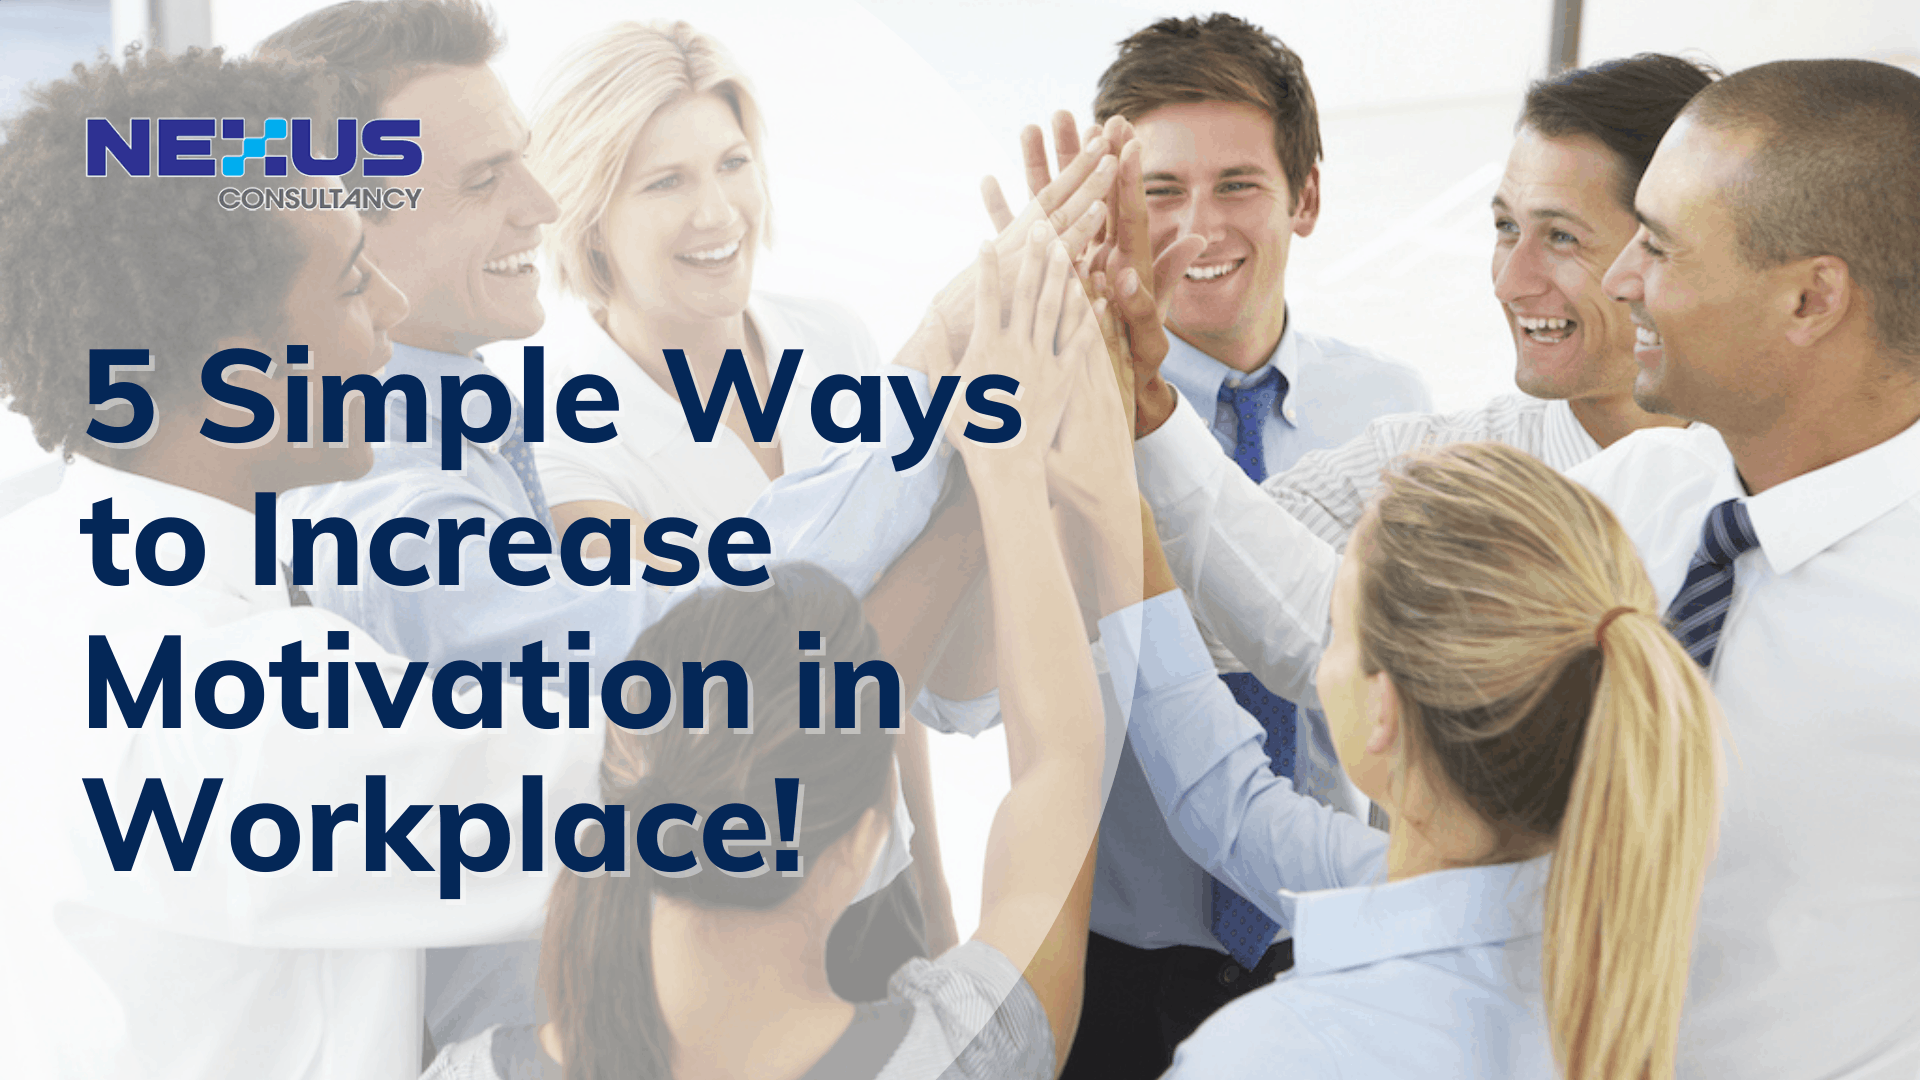 5 simple ways to increase motivation in workplace